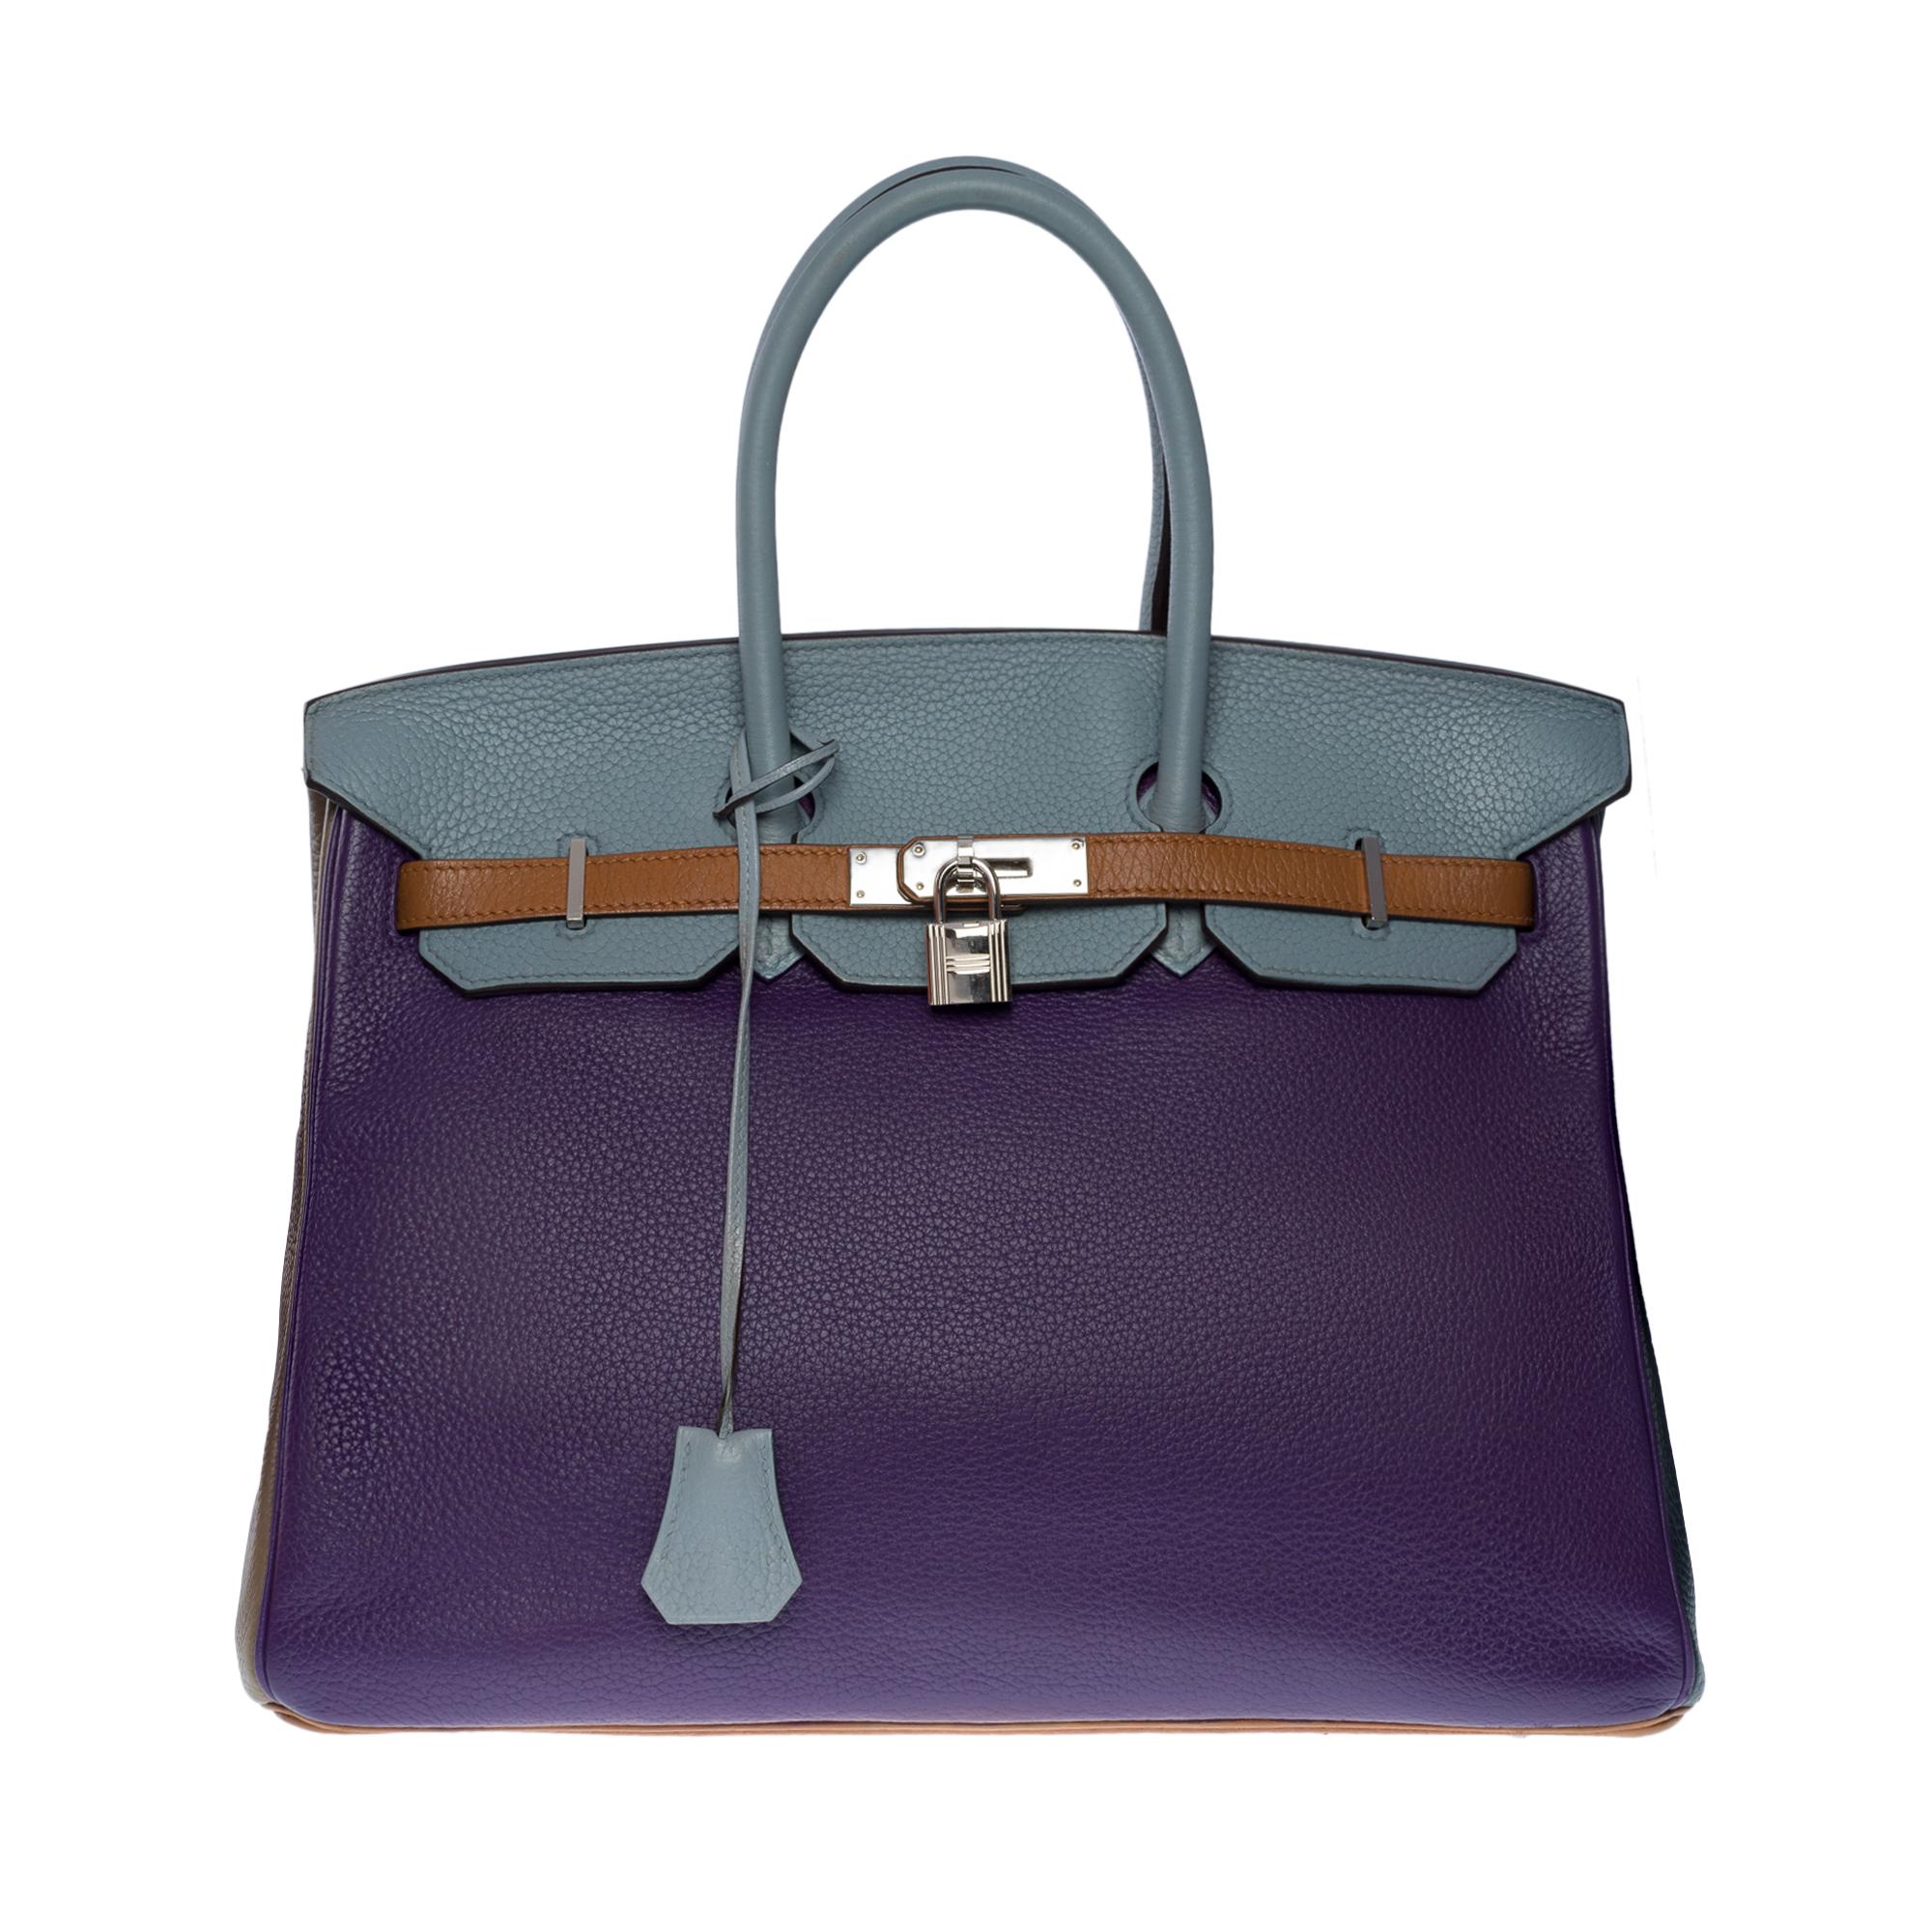 Exceptional Hermes Birkin 35  limited edition 